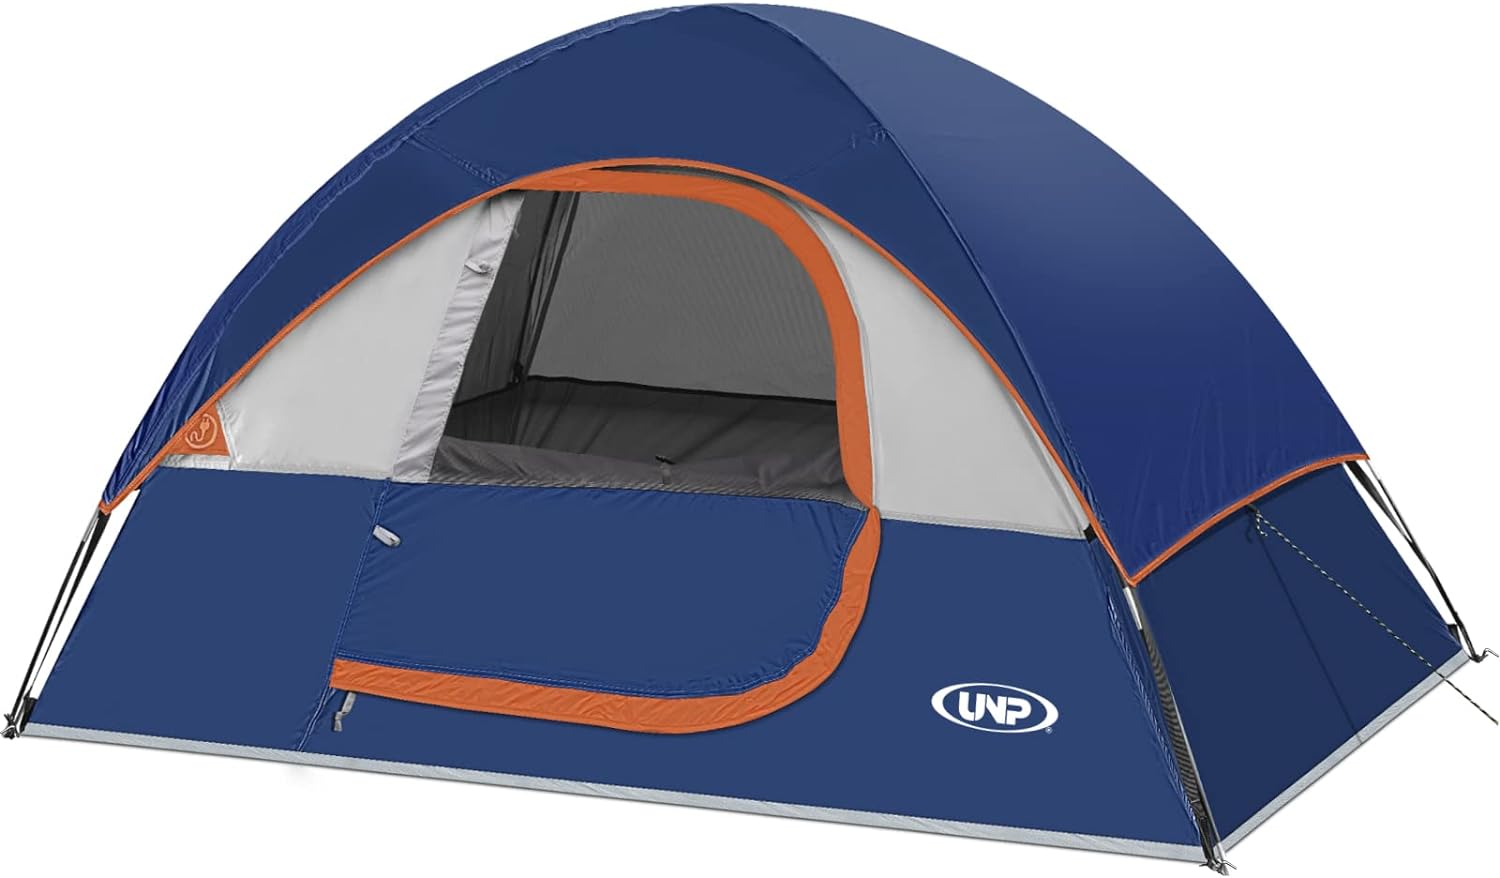 Effortlessly Pitching Your Tent